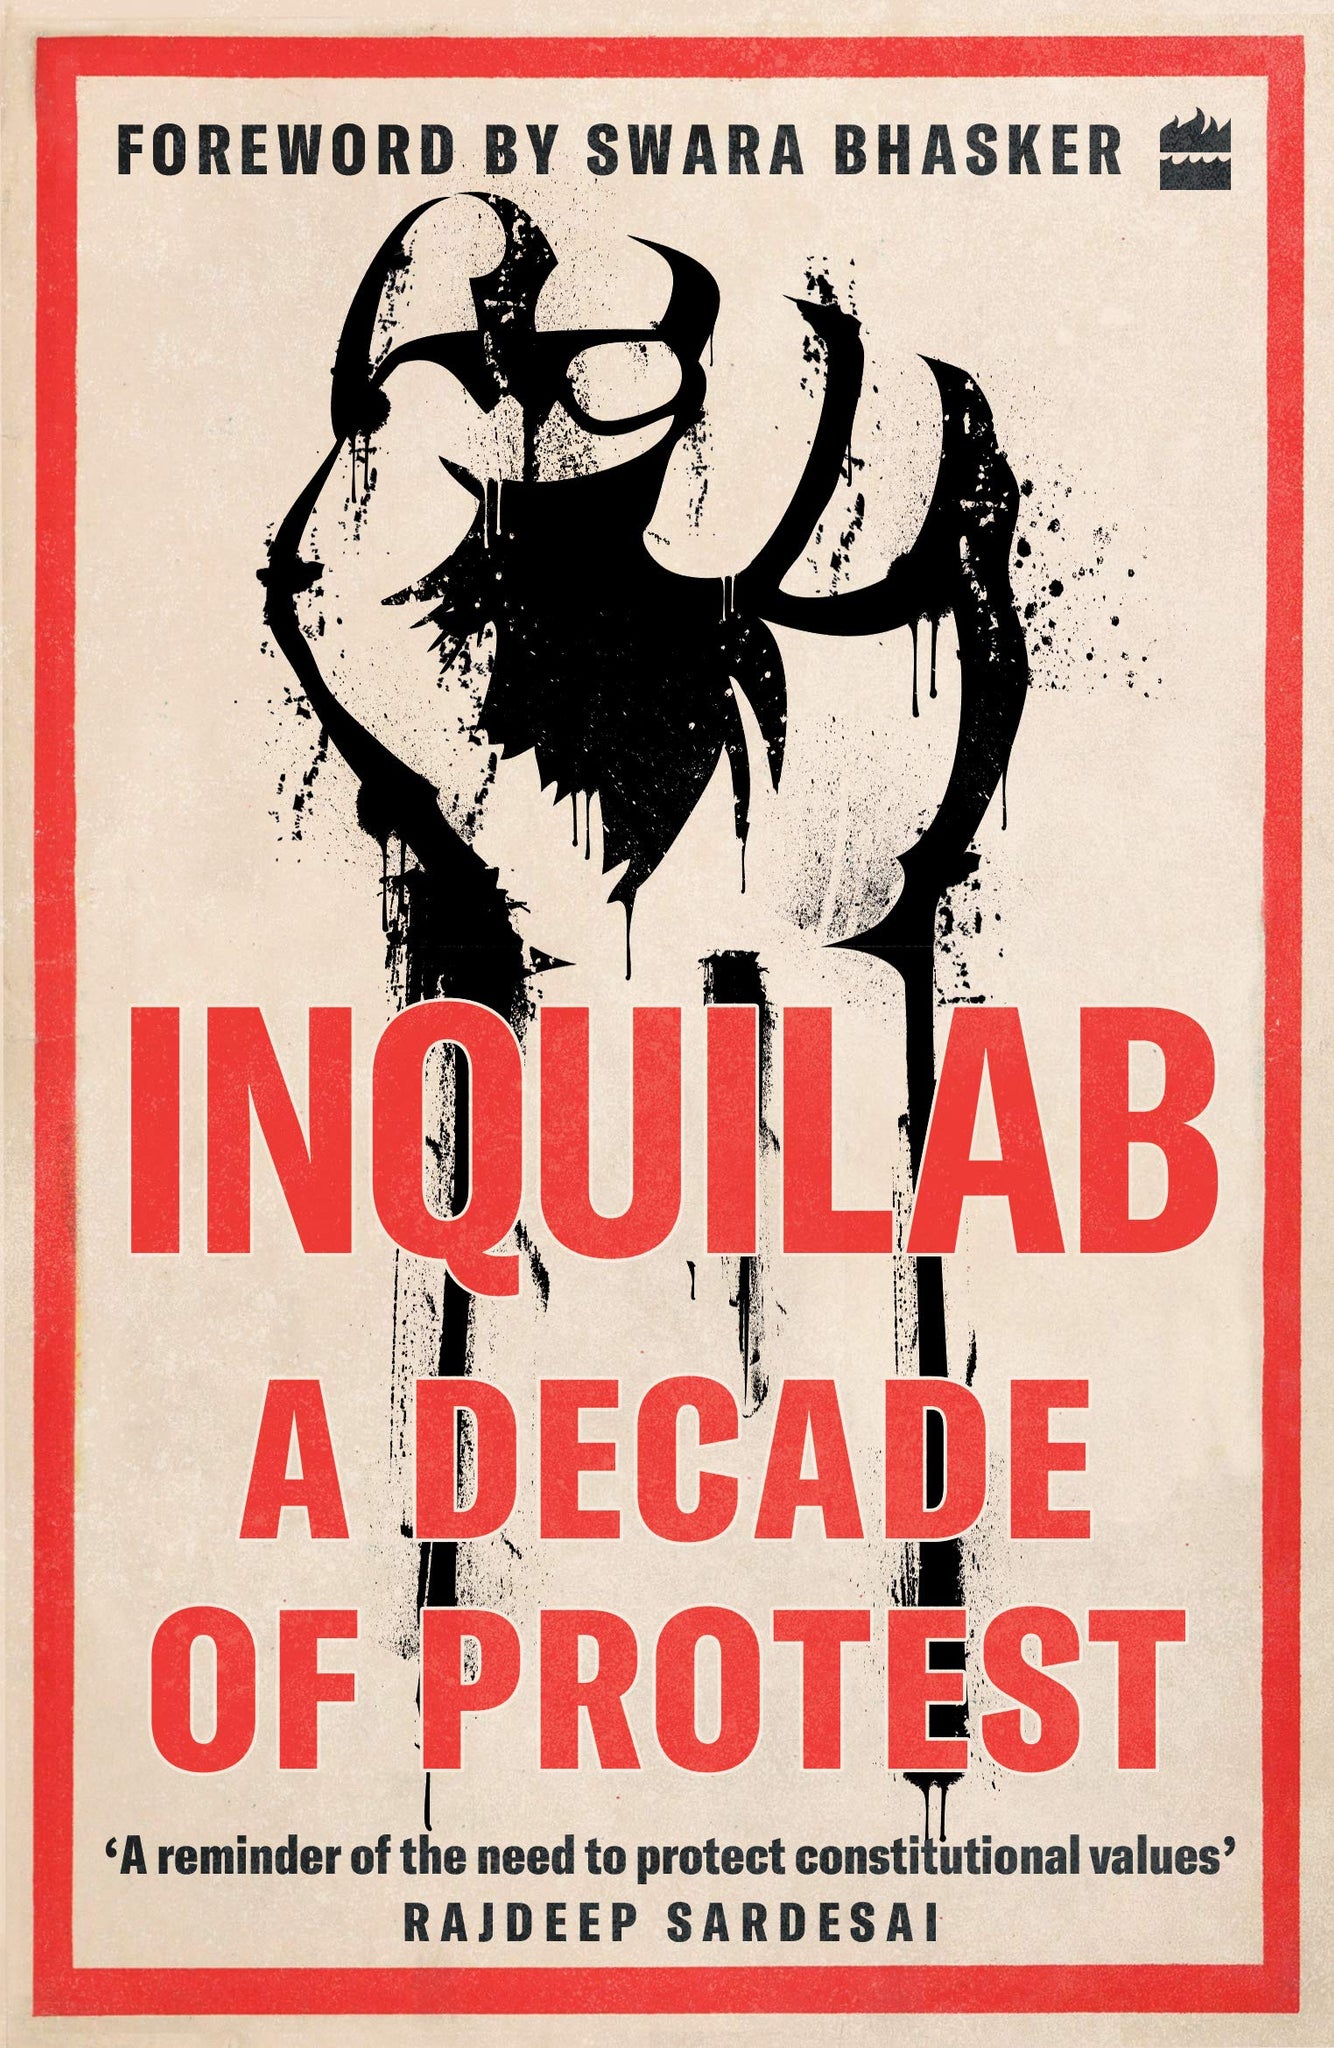 Inquilab : A Decade of Protest - Paperback